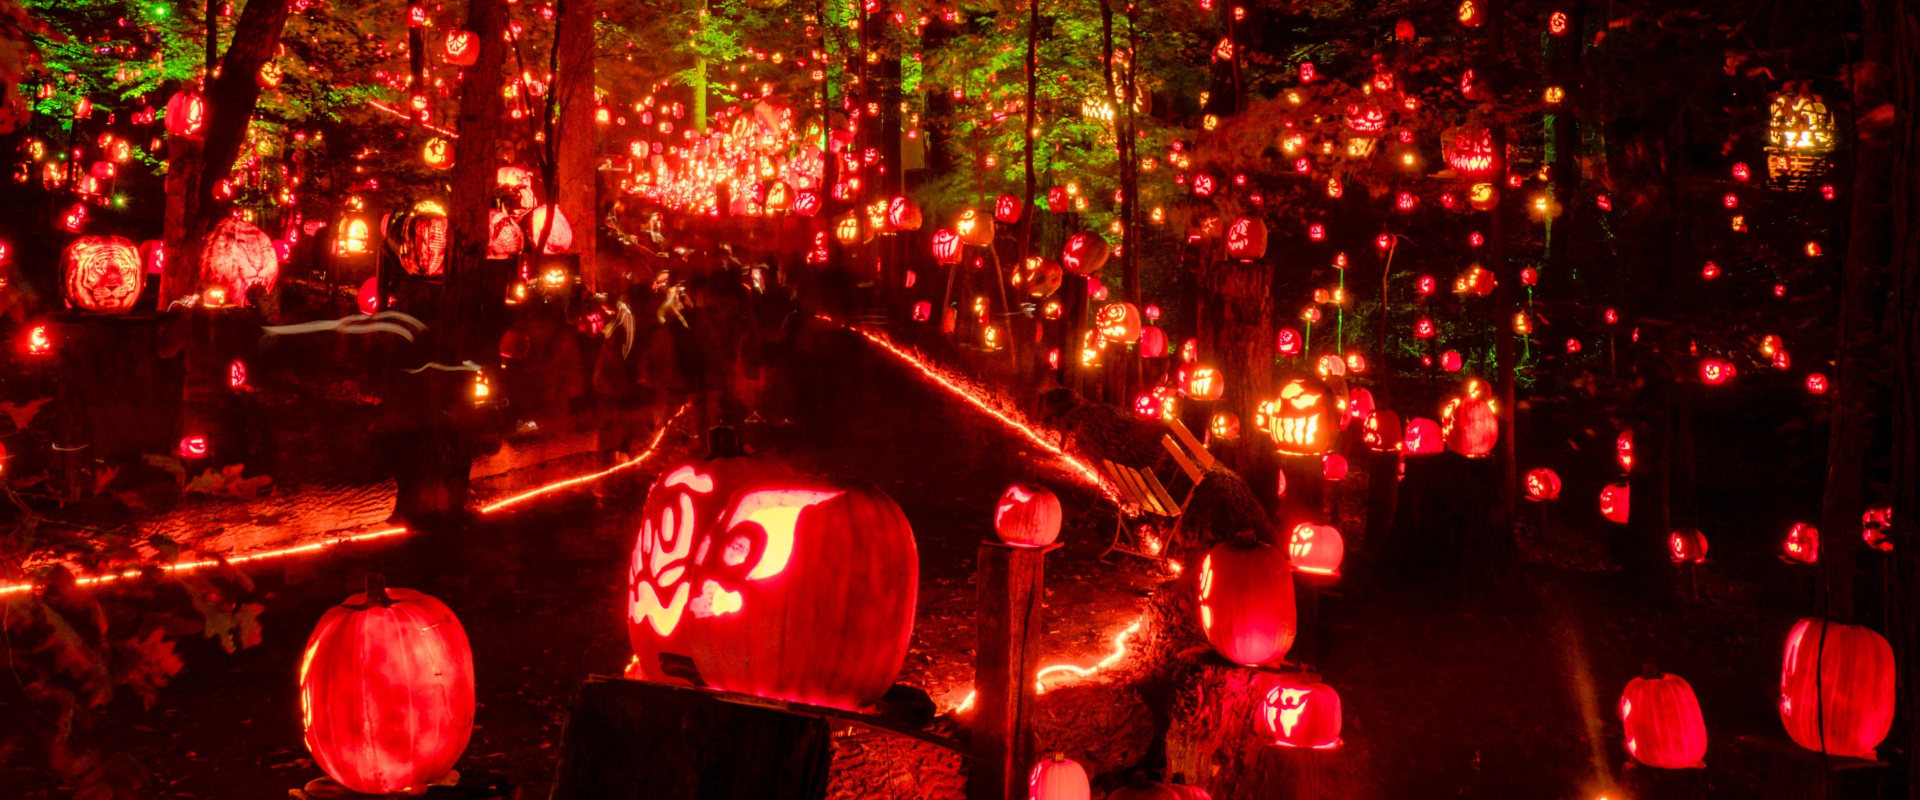 Where to Find the Best Halloween Parties in the US